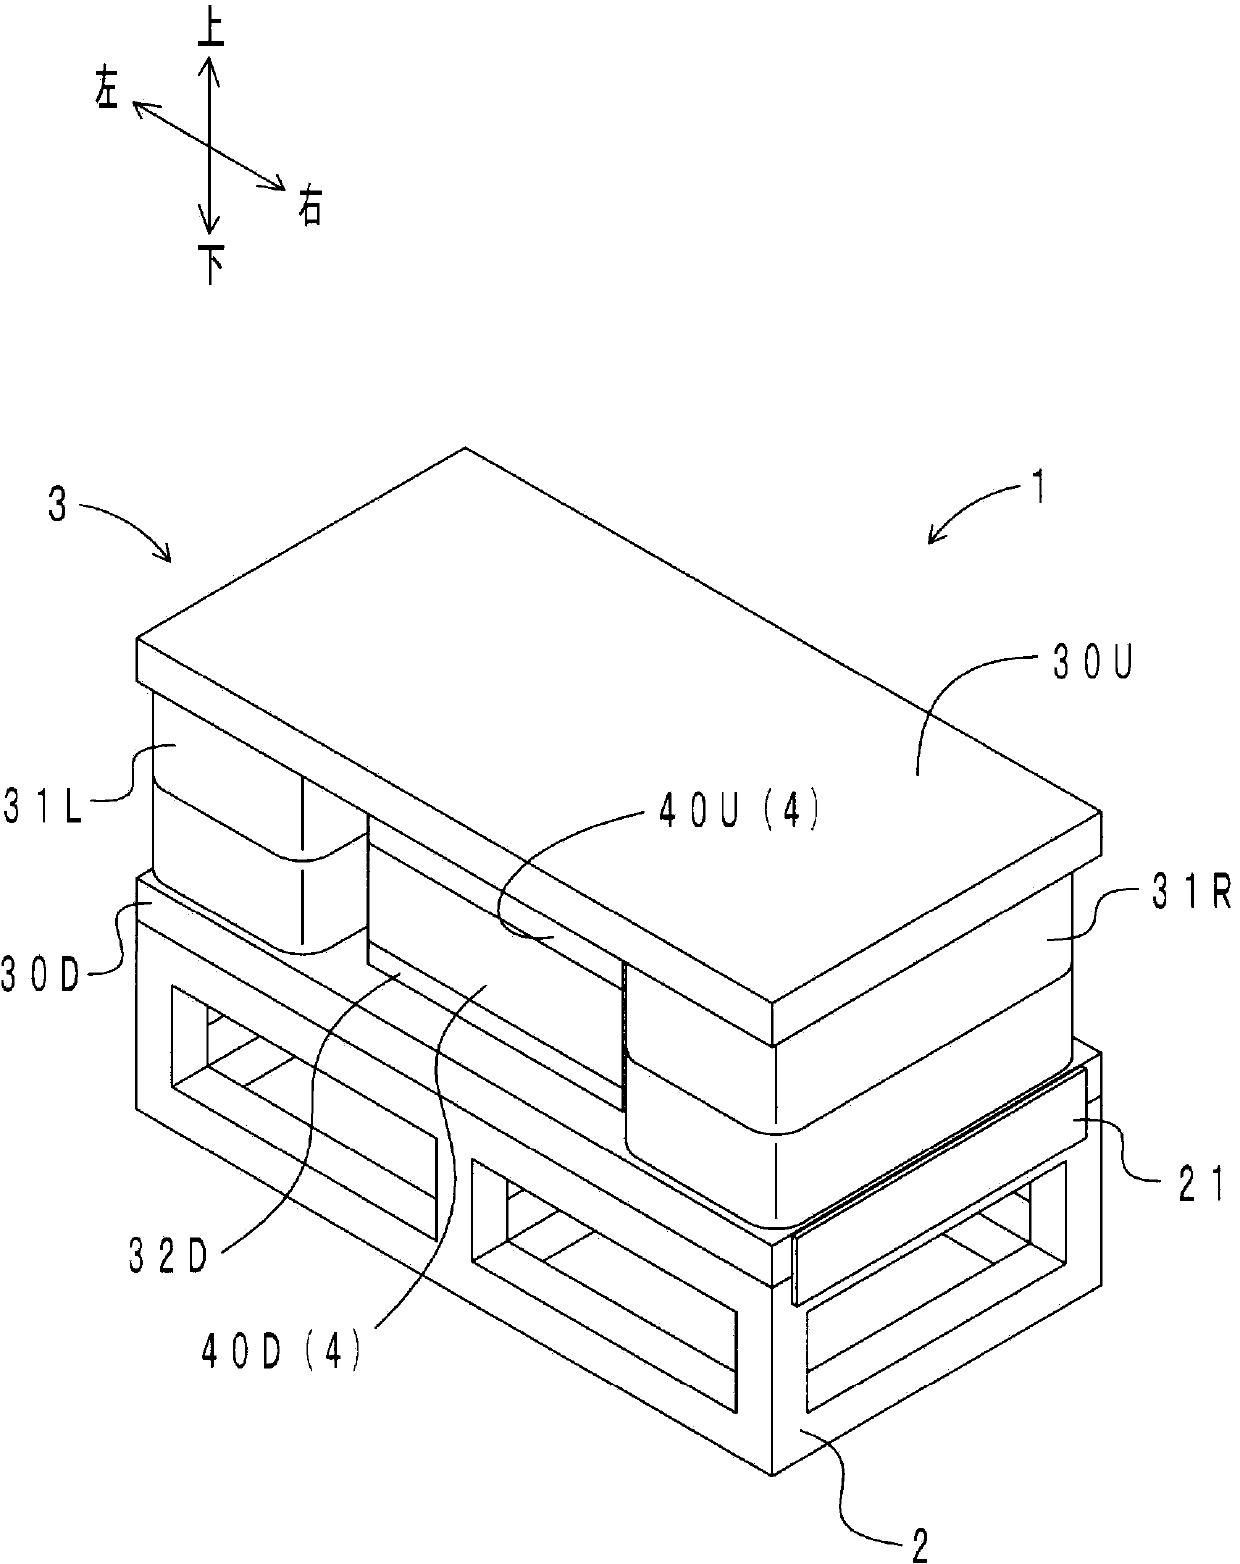 Urethane foam molding and method for manufacturing same